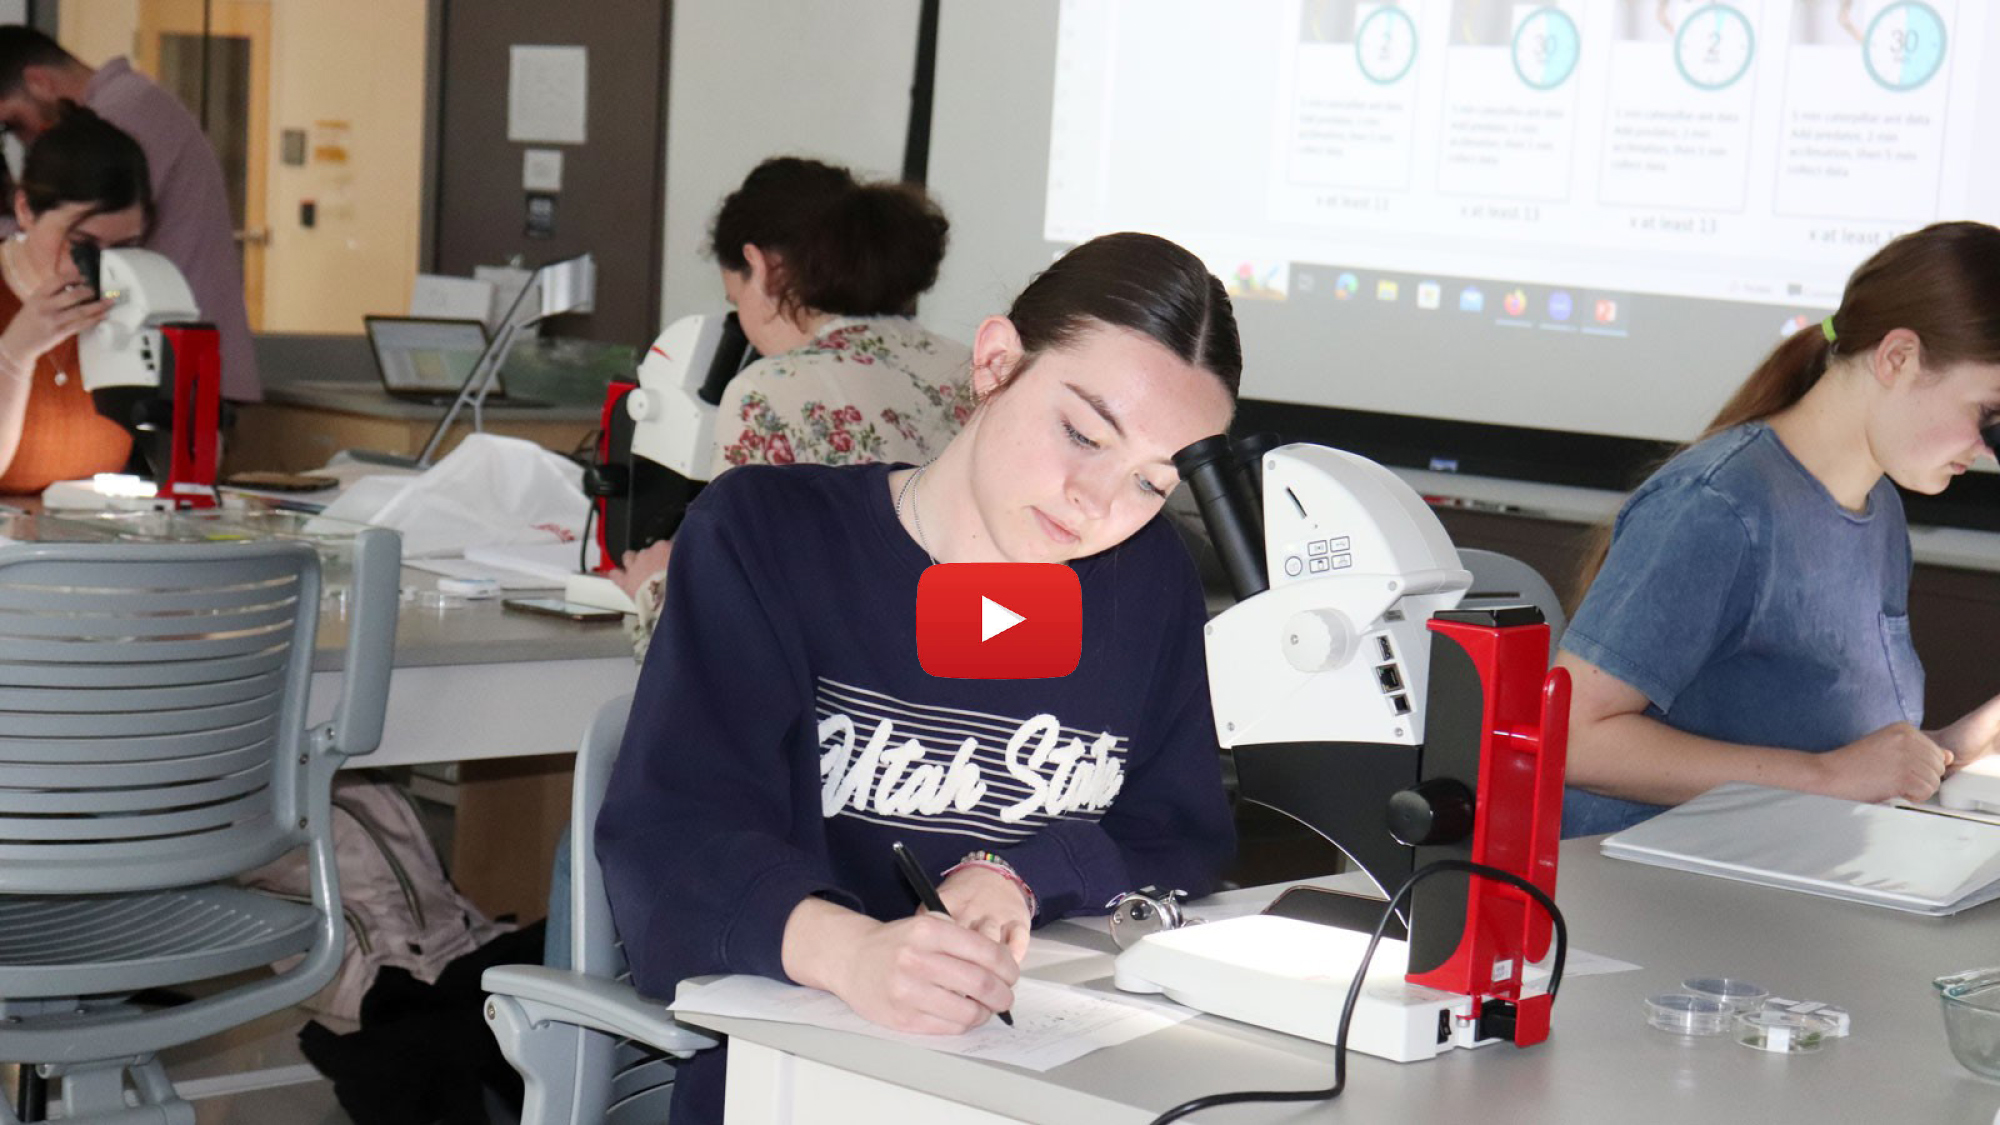 Mutual Benefits: Undergrads Receive Hands-on Introduction to Research in USU Biology Lab